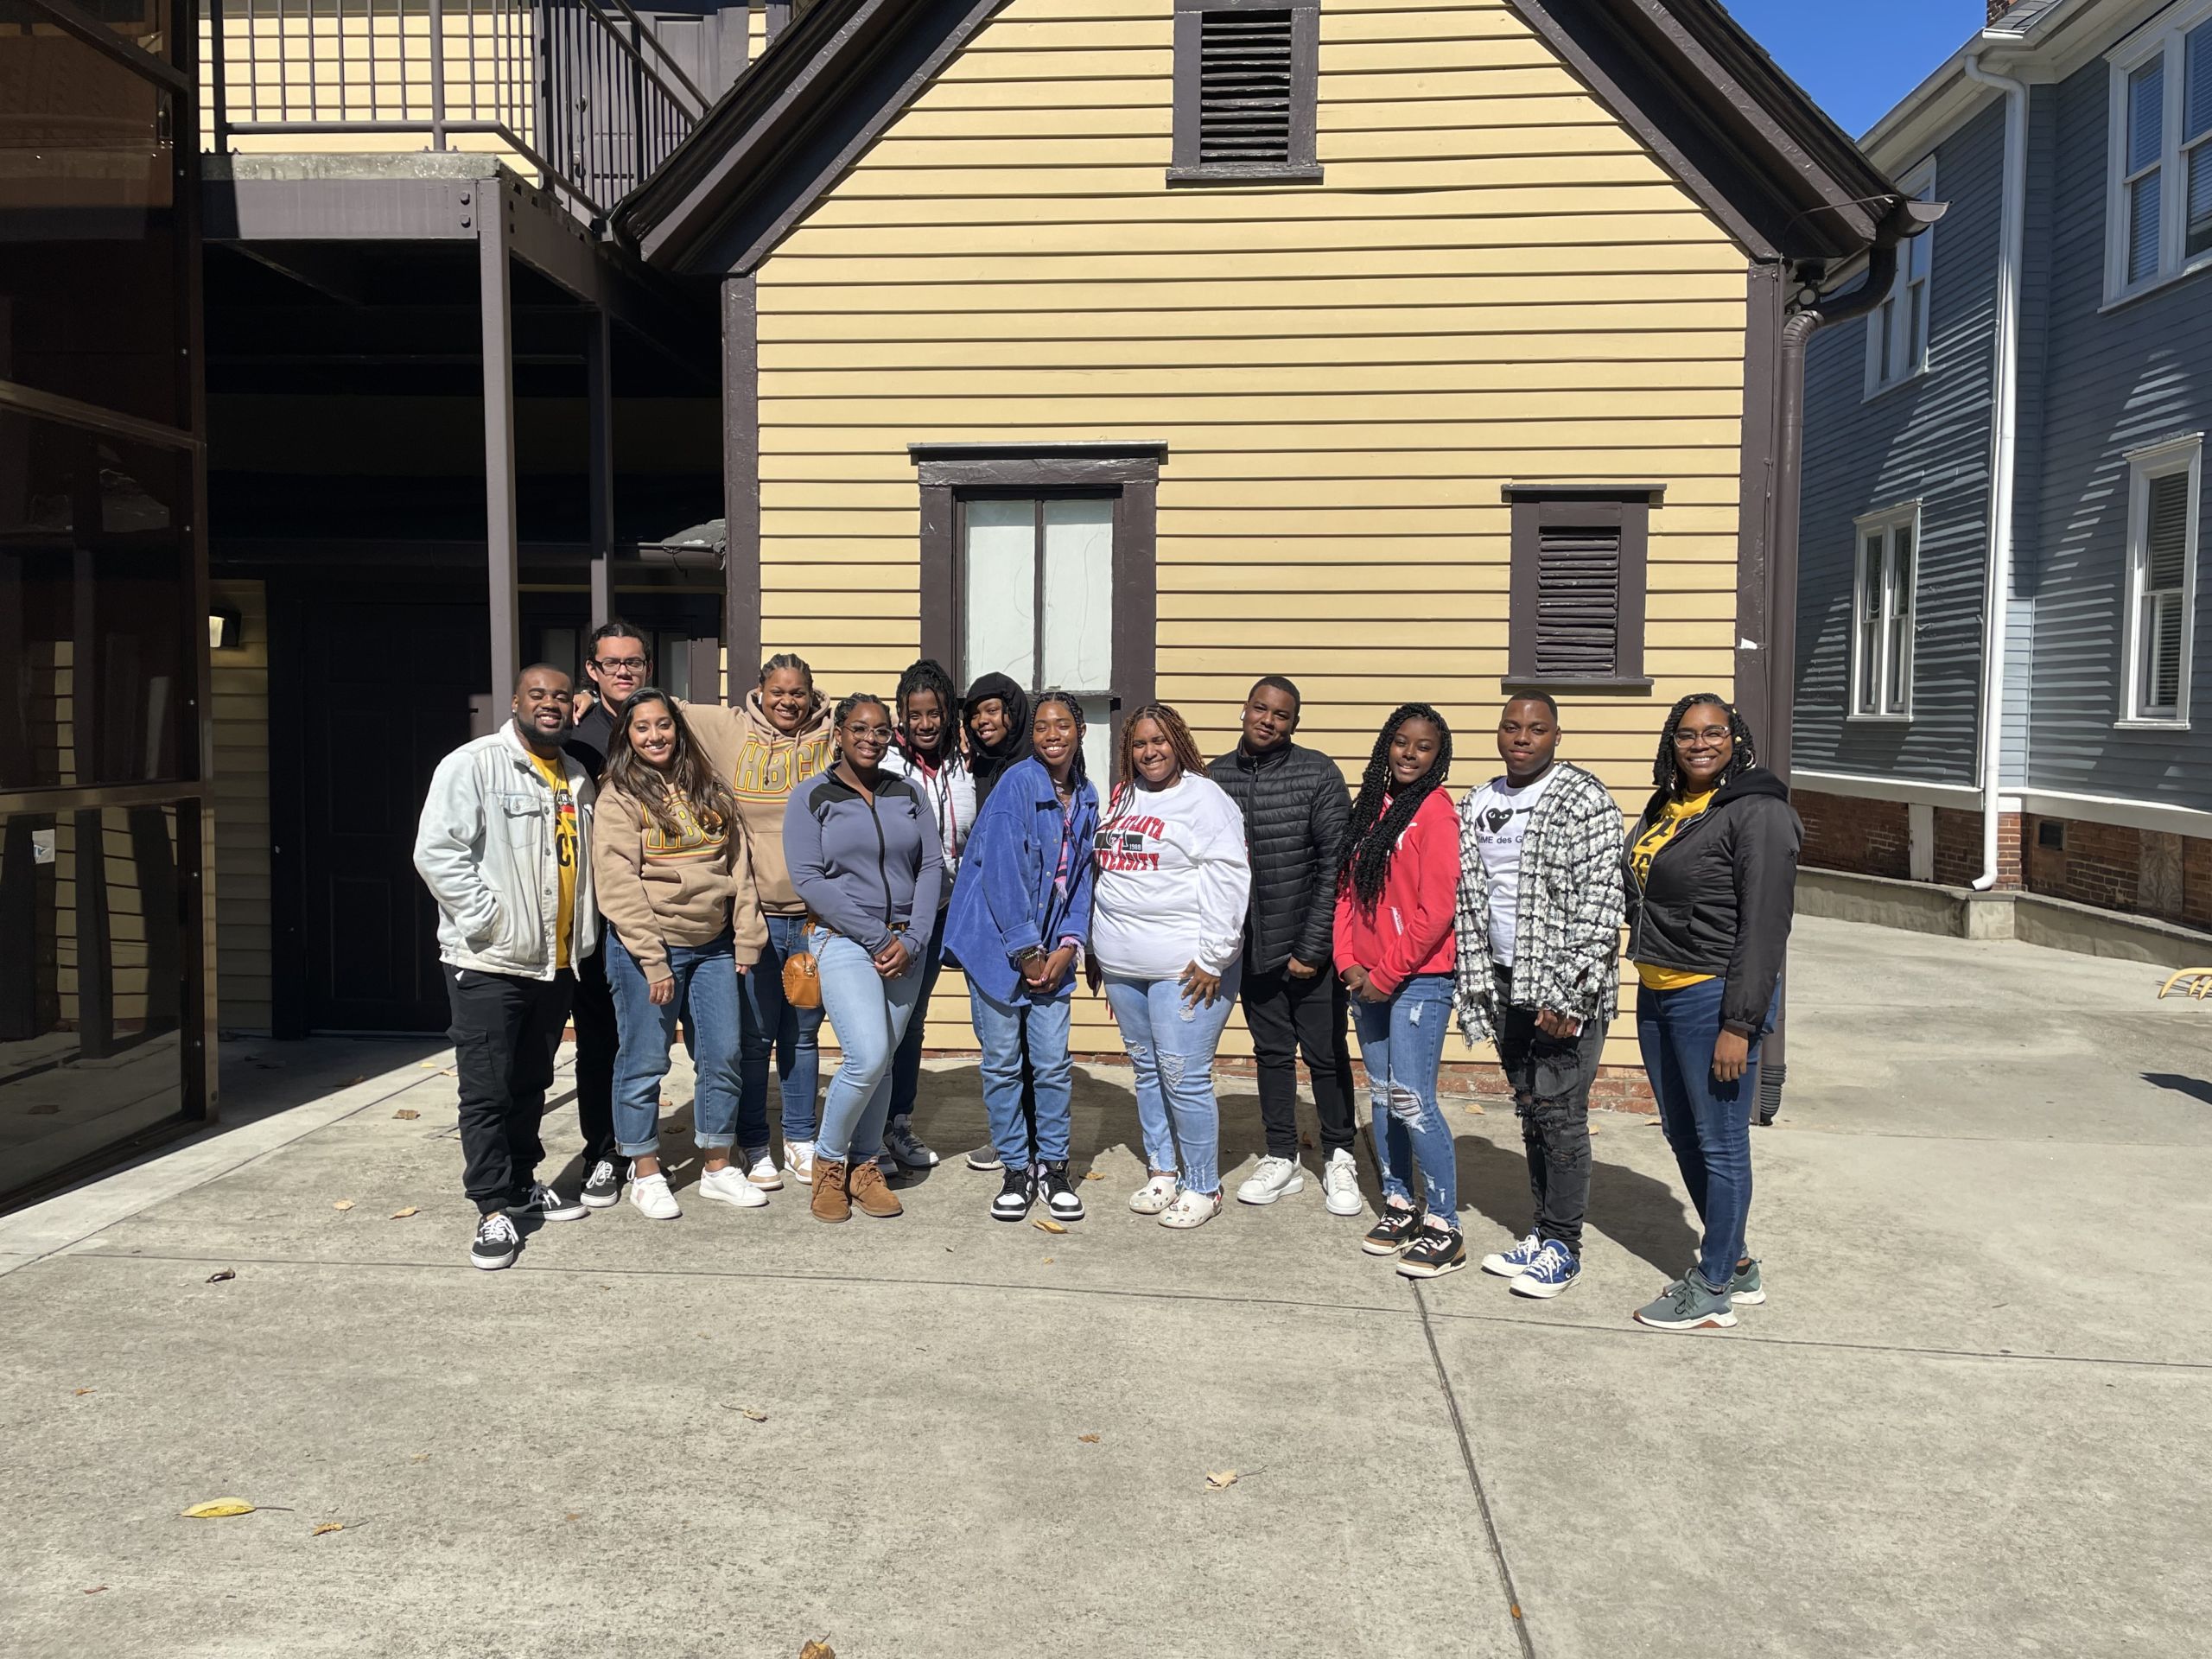 Image of 13 students visiting historic Black colleges in front of a home